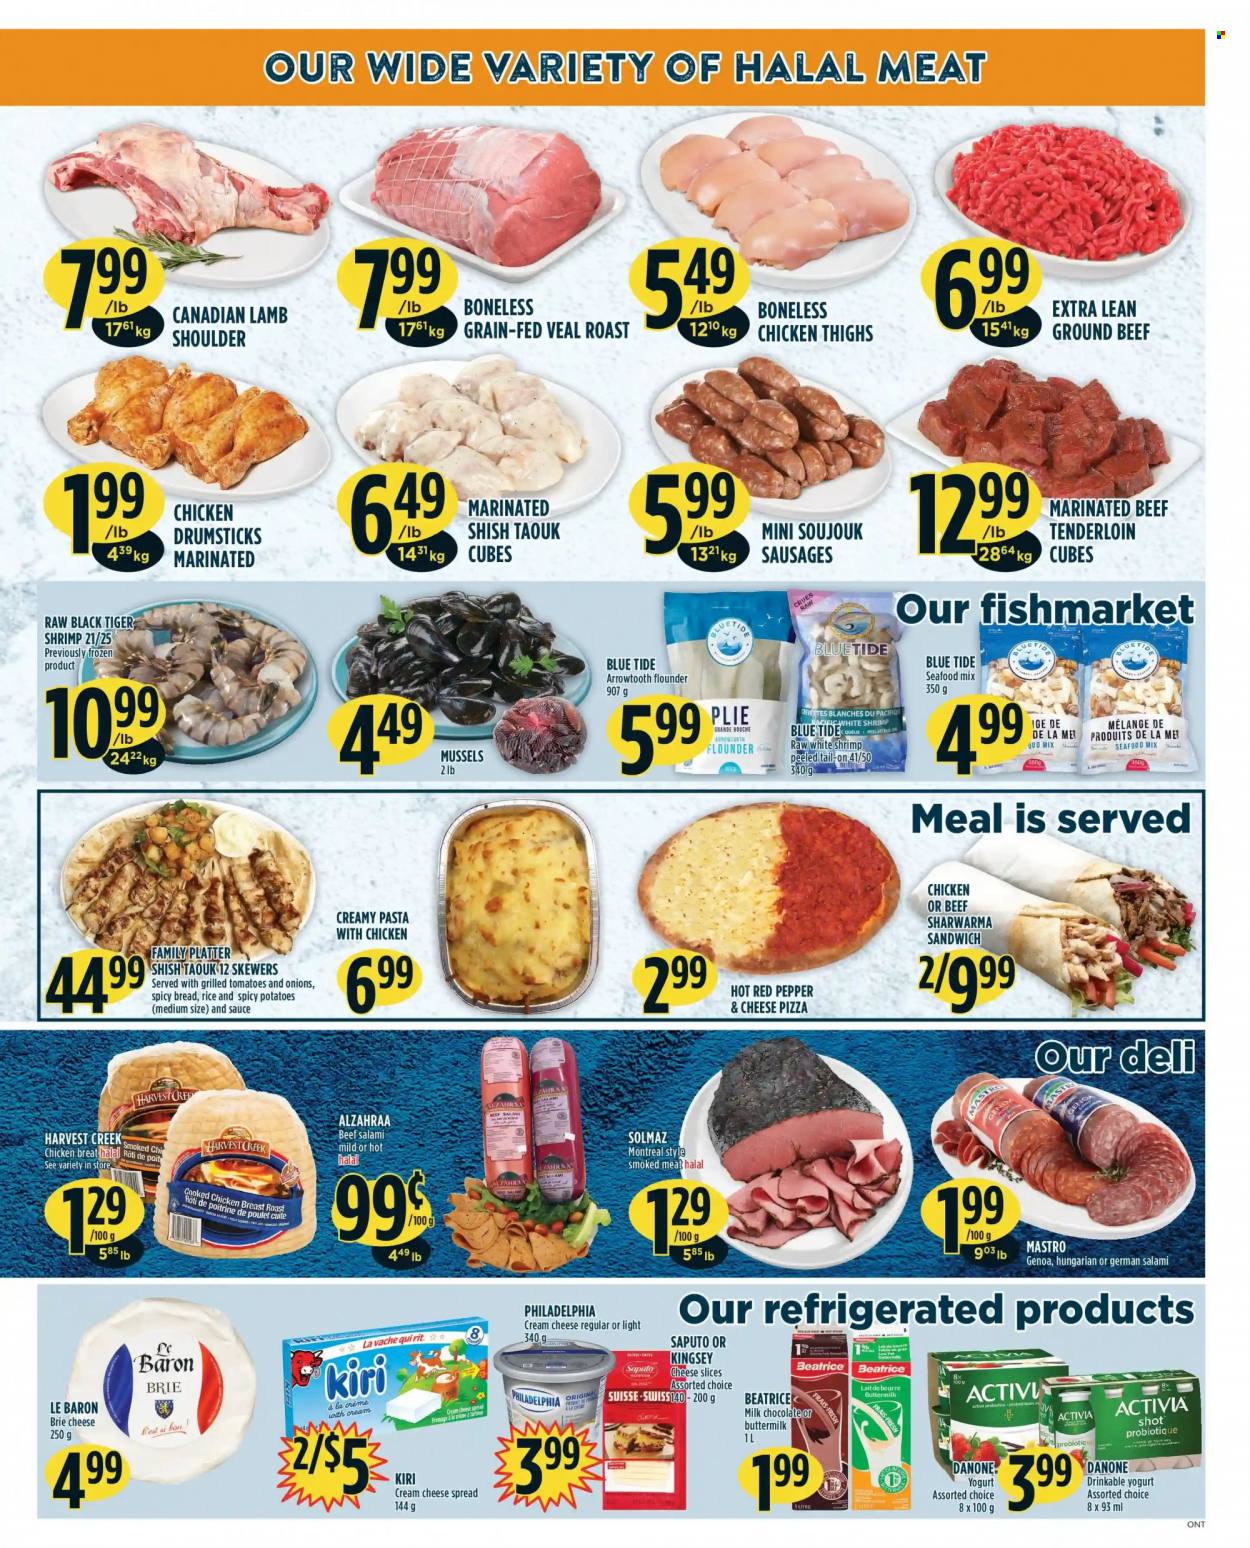 thumbnail - Adonis Flyer - October 14, 2021 - October 20, 2021 - Sales products - potatoes, flounder, mussels, seafood, shrimps, pizza, sandwich, sauce, salami, sausage, cheese spread, cream cheese, sliced cheese, brie, Kiri, The Laughing Cow, yoghurt, Activia, buttermilk, milk chocolate, chocolate, rice, chicken breasts, chicken thighs, chicken drumsticks, chicken, beef meat, ground beef, beef tenderloin, marinated beef, lamb meat, lamb shoulder, Tide, probiotics, Danone, Philadelphia. Page 3.